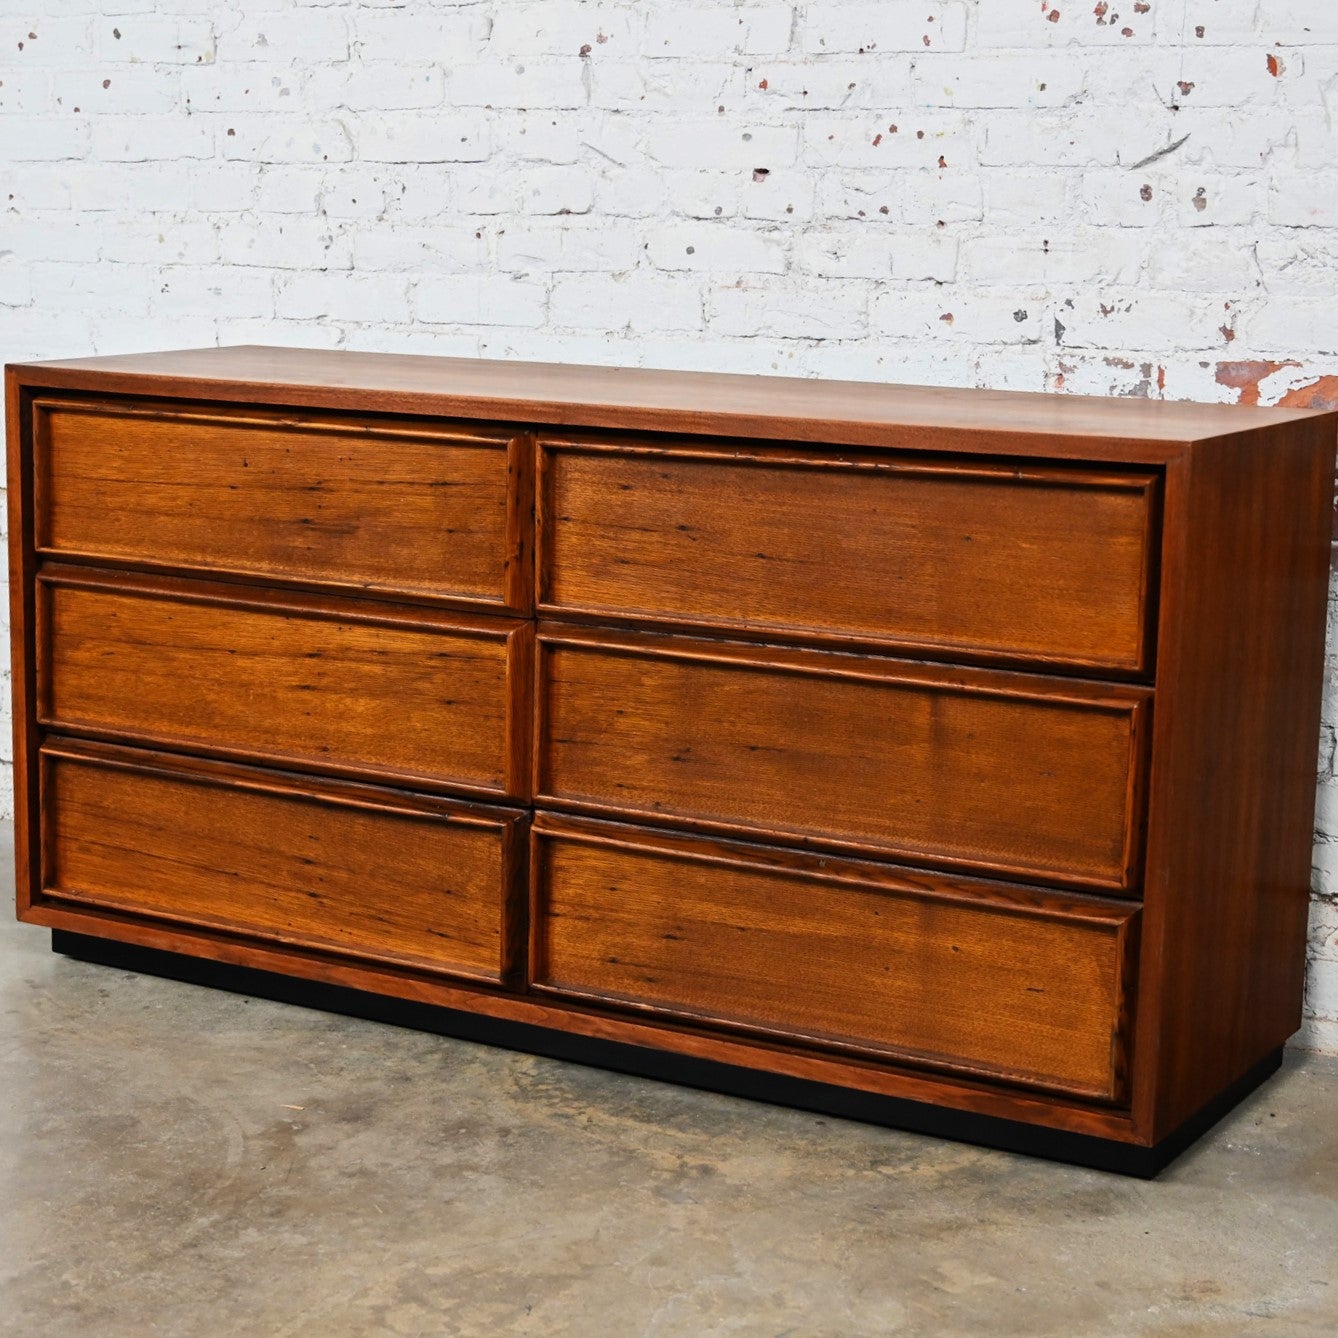 Fabulous vintage Mid Century Modern 6 drawer dresser by Dillingham Manufacturing Company. Comprised of a walnut case rustic pecky cypress drawers, and a recessed black painted plinth/floating base. Beautiful condition, keeping in mind that this is